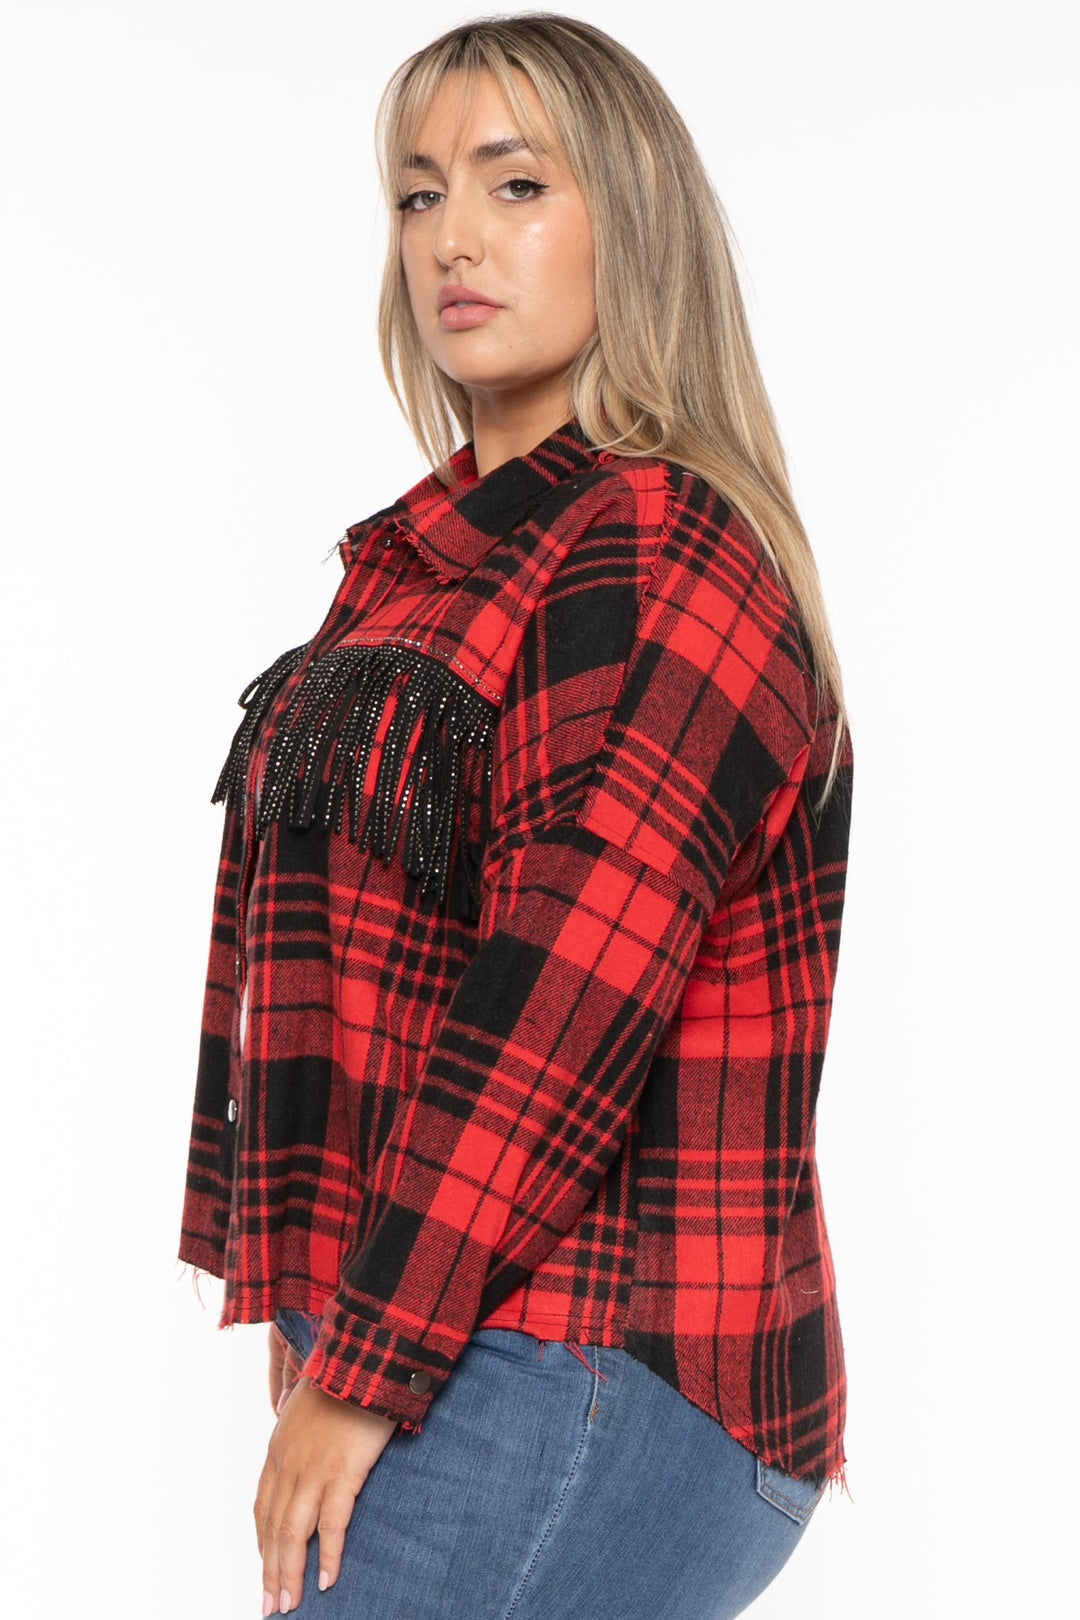 GEE GEE Jackets And Outerwear Plus Size Distress  Plaid Fringe  Jacket - Red